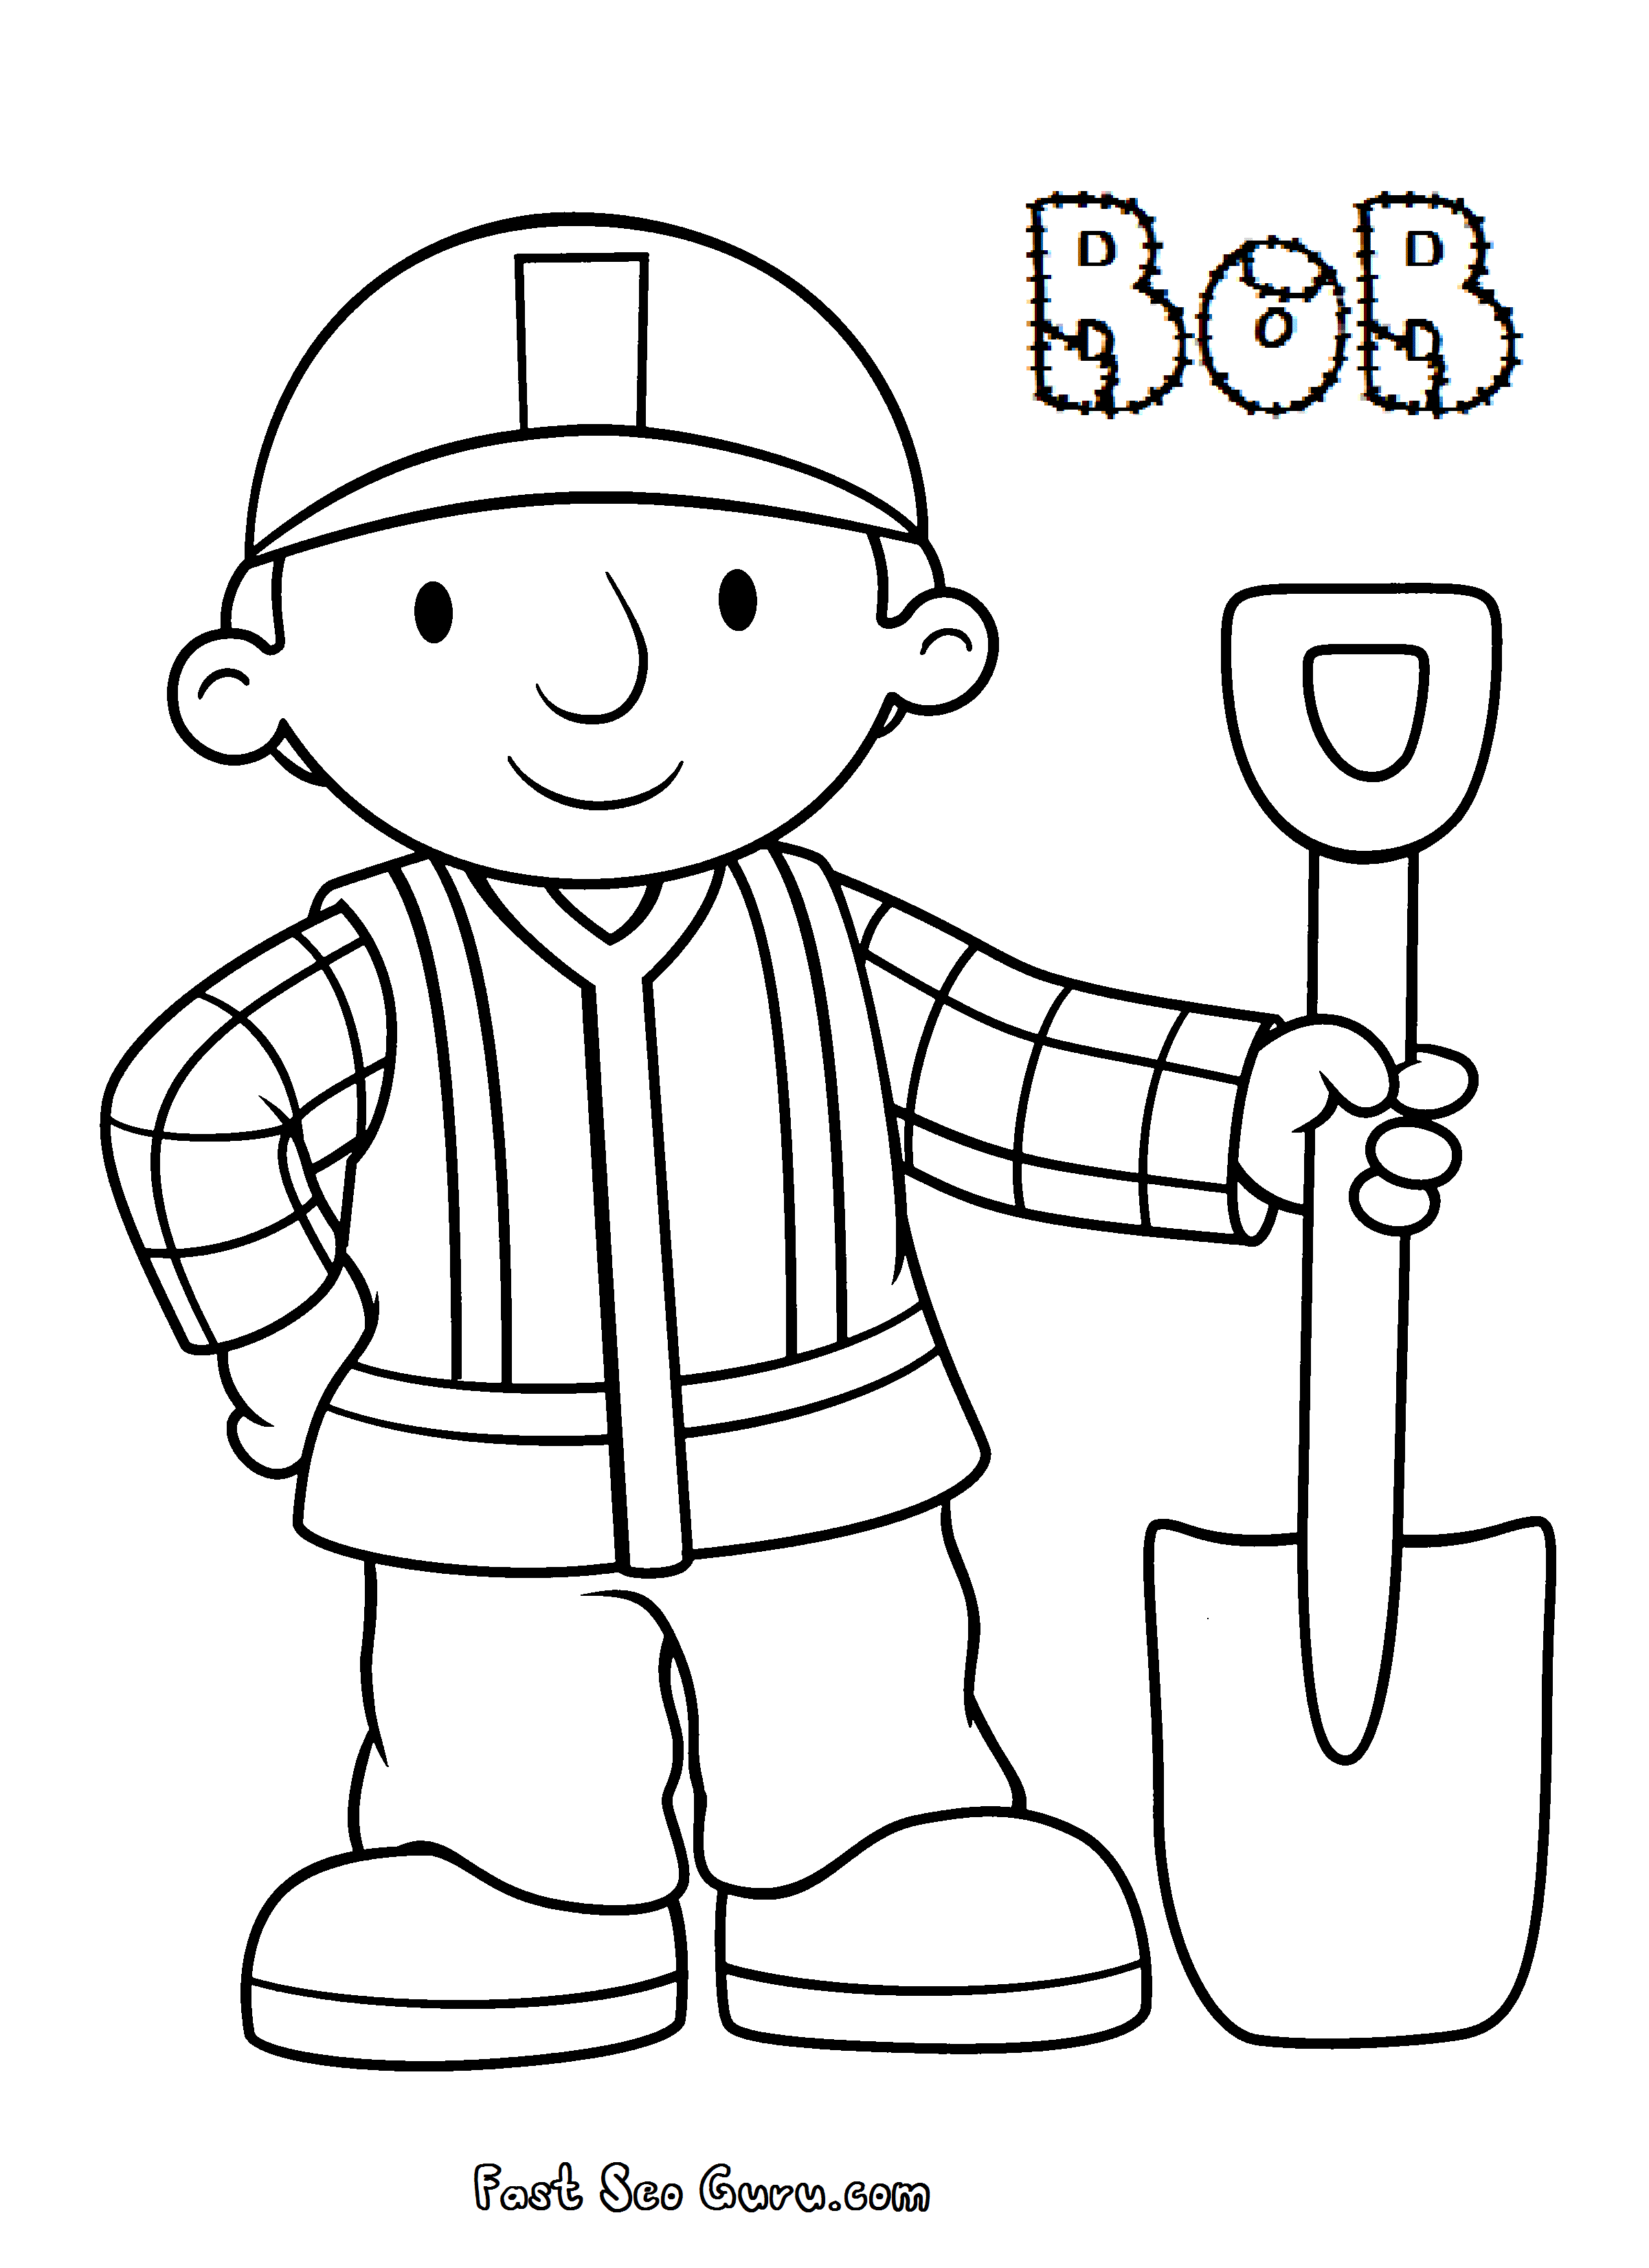 Print out Bob the Builder Coloring in Pages